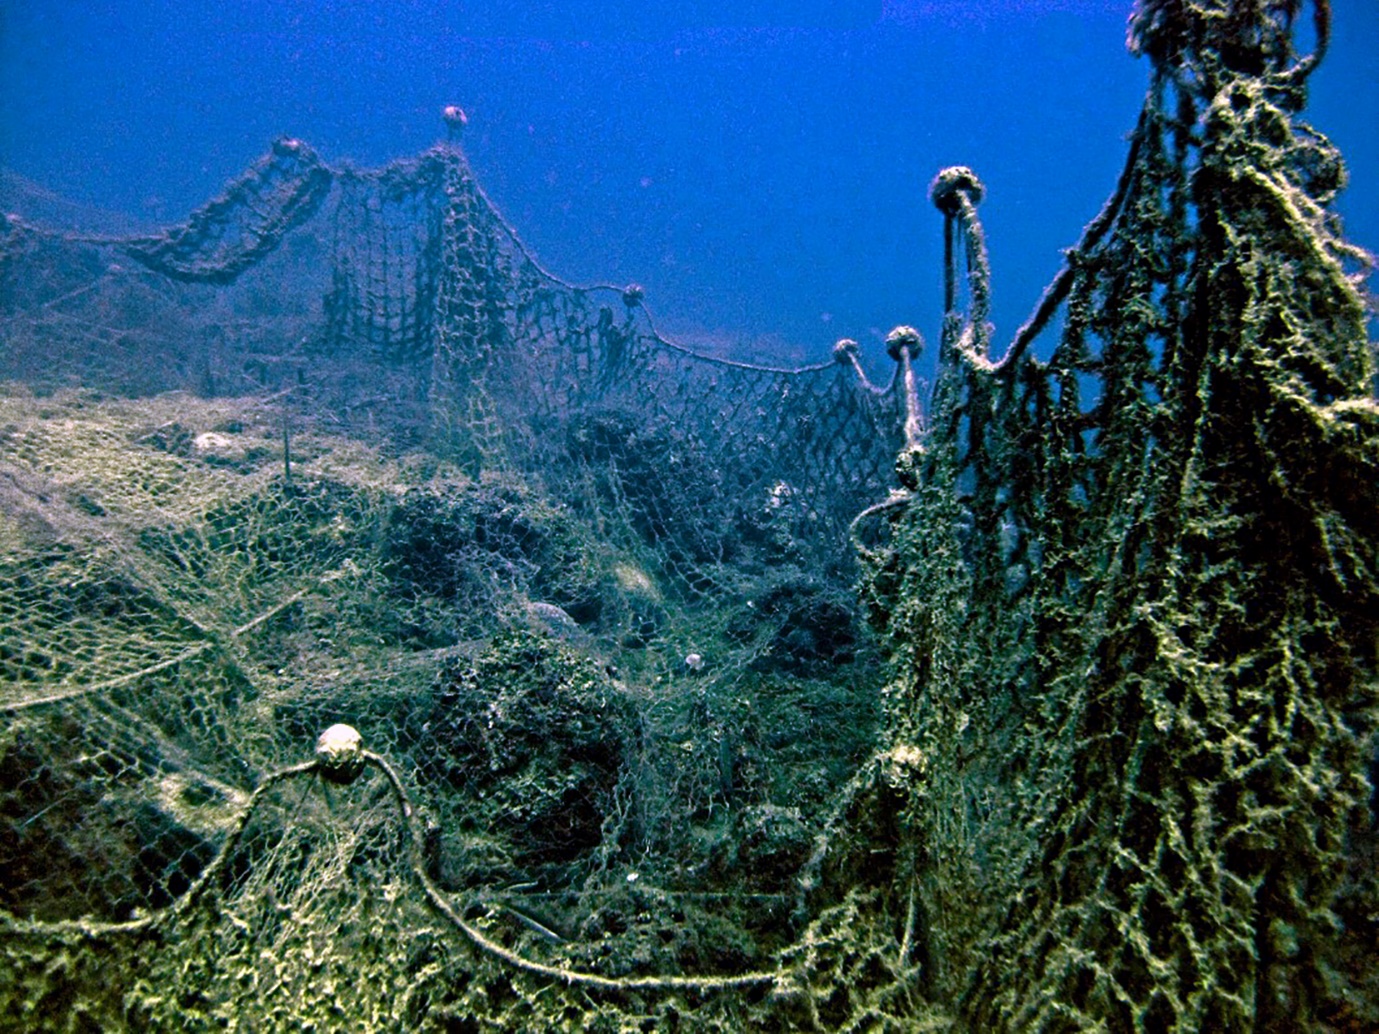 Abandoned nets lay on the sea bed off the coast